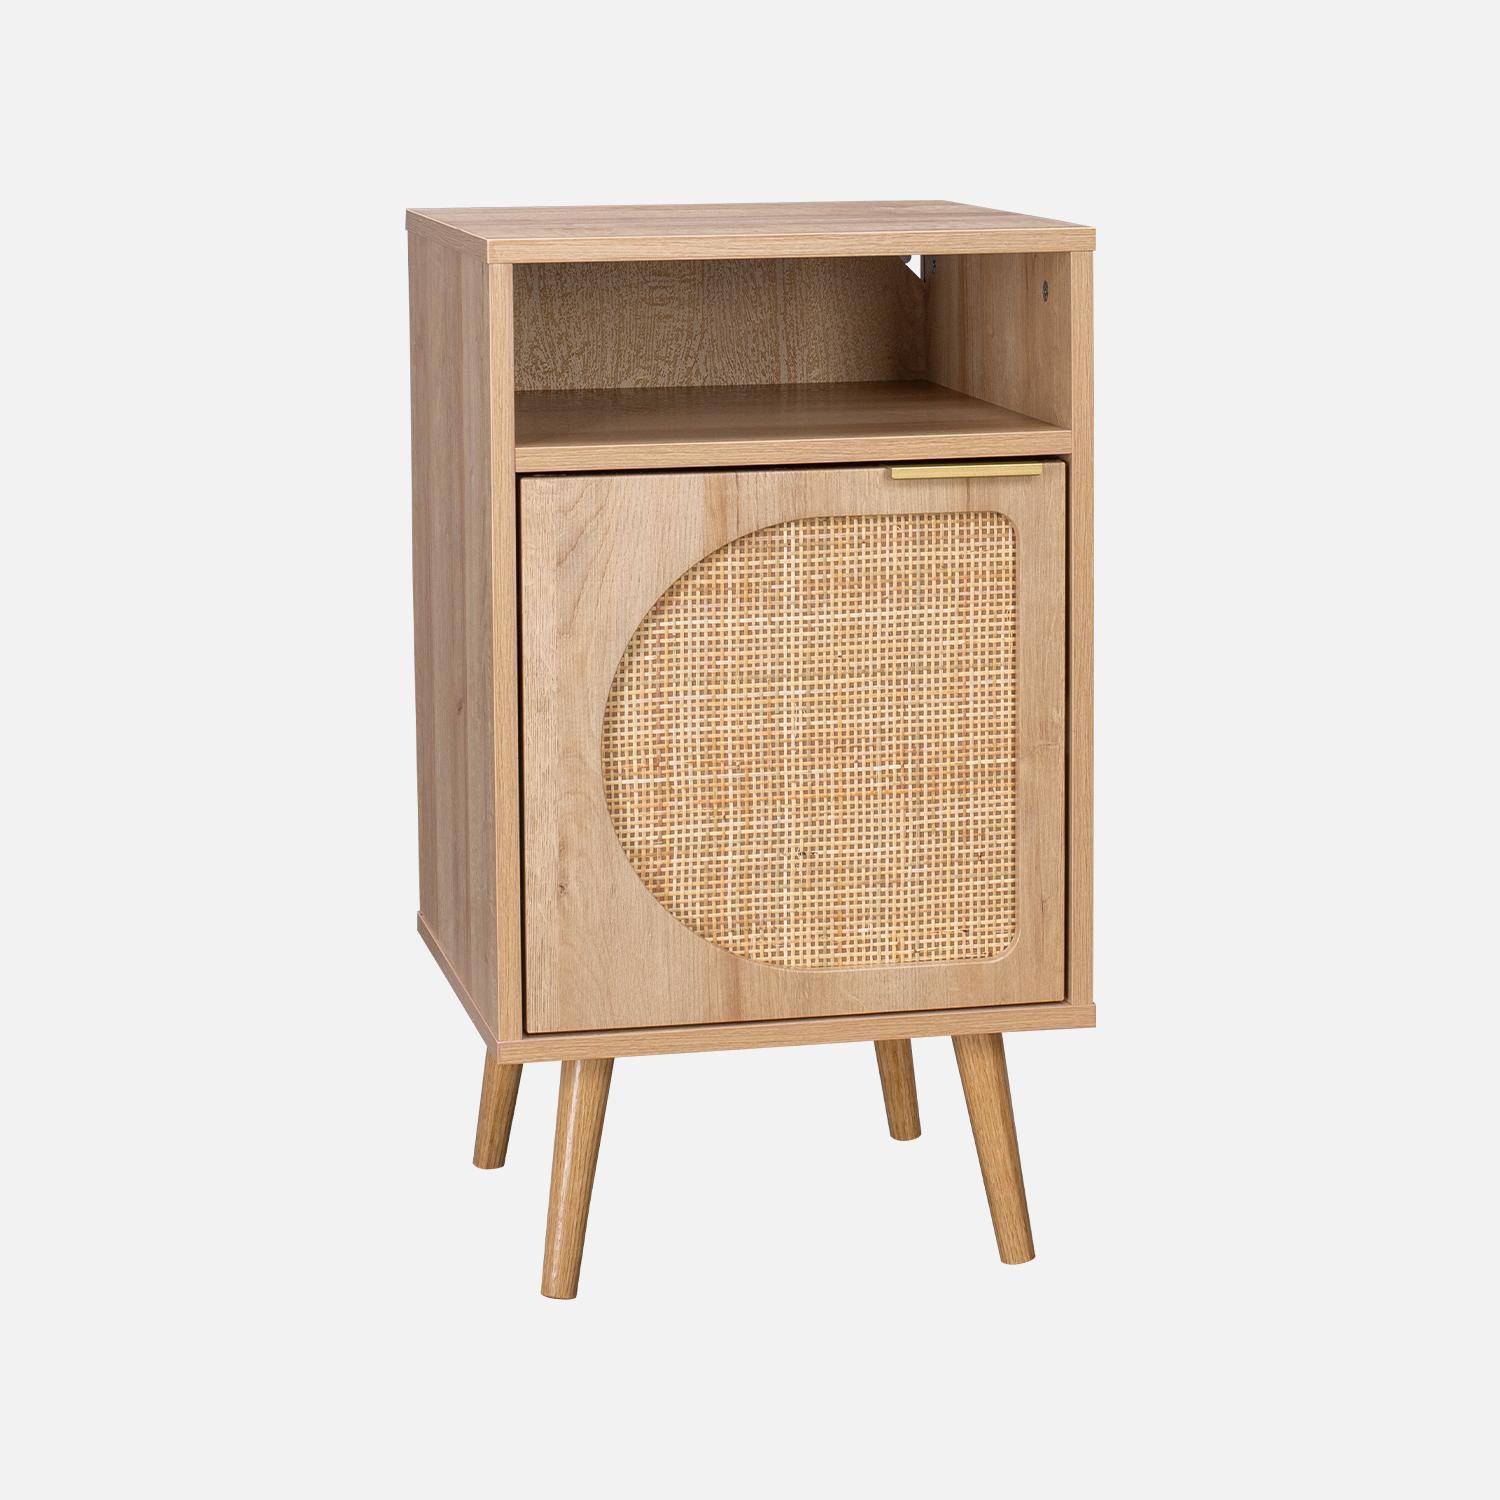 Wood and rounded cane rattan bedside table, 40x39x65.8cm, Eva, 1 cupboard, 1 storage space Photo5